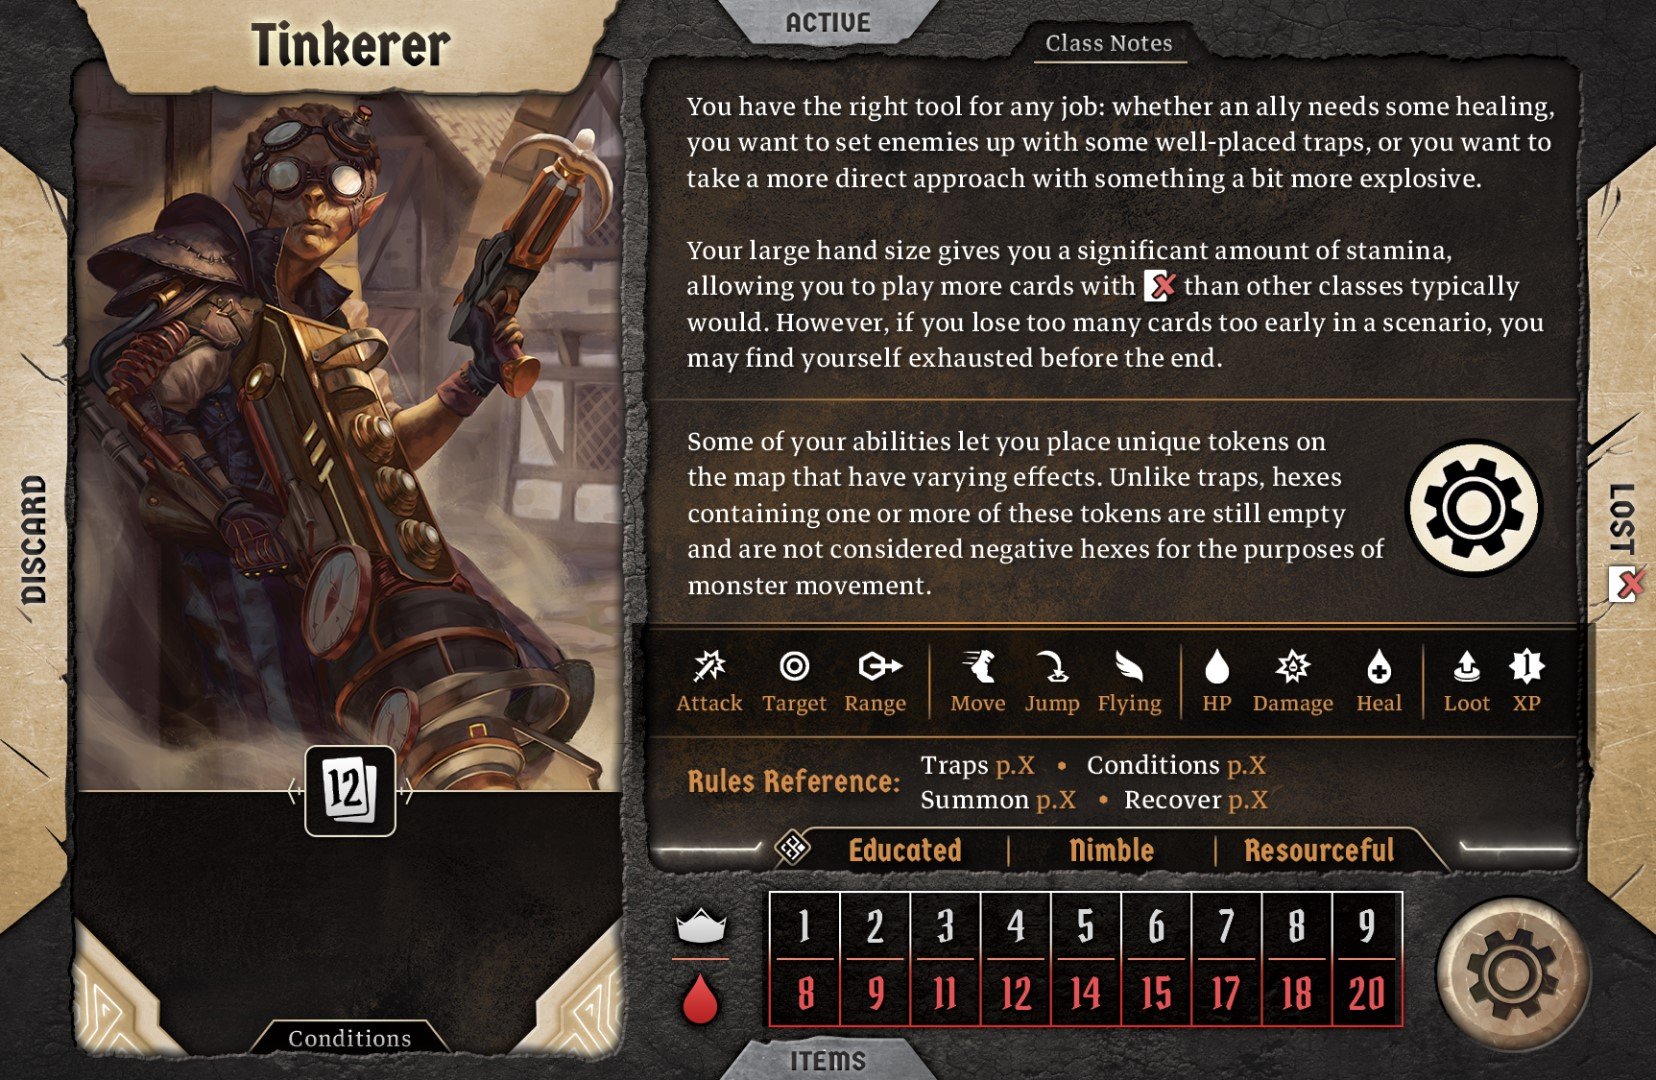 Gloomhaven Isaac Childres interview - Cephalofair image of Tinkerer character mat (front) from second edition